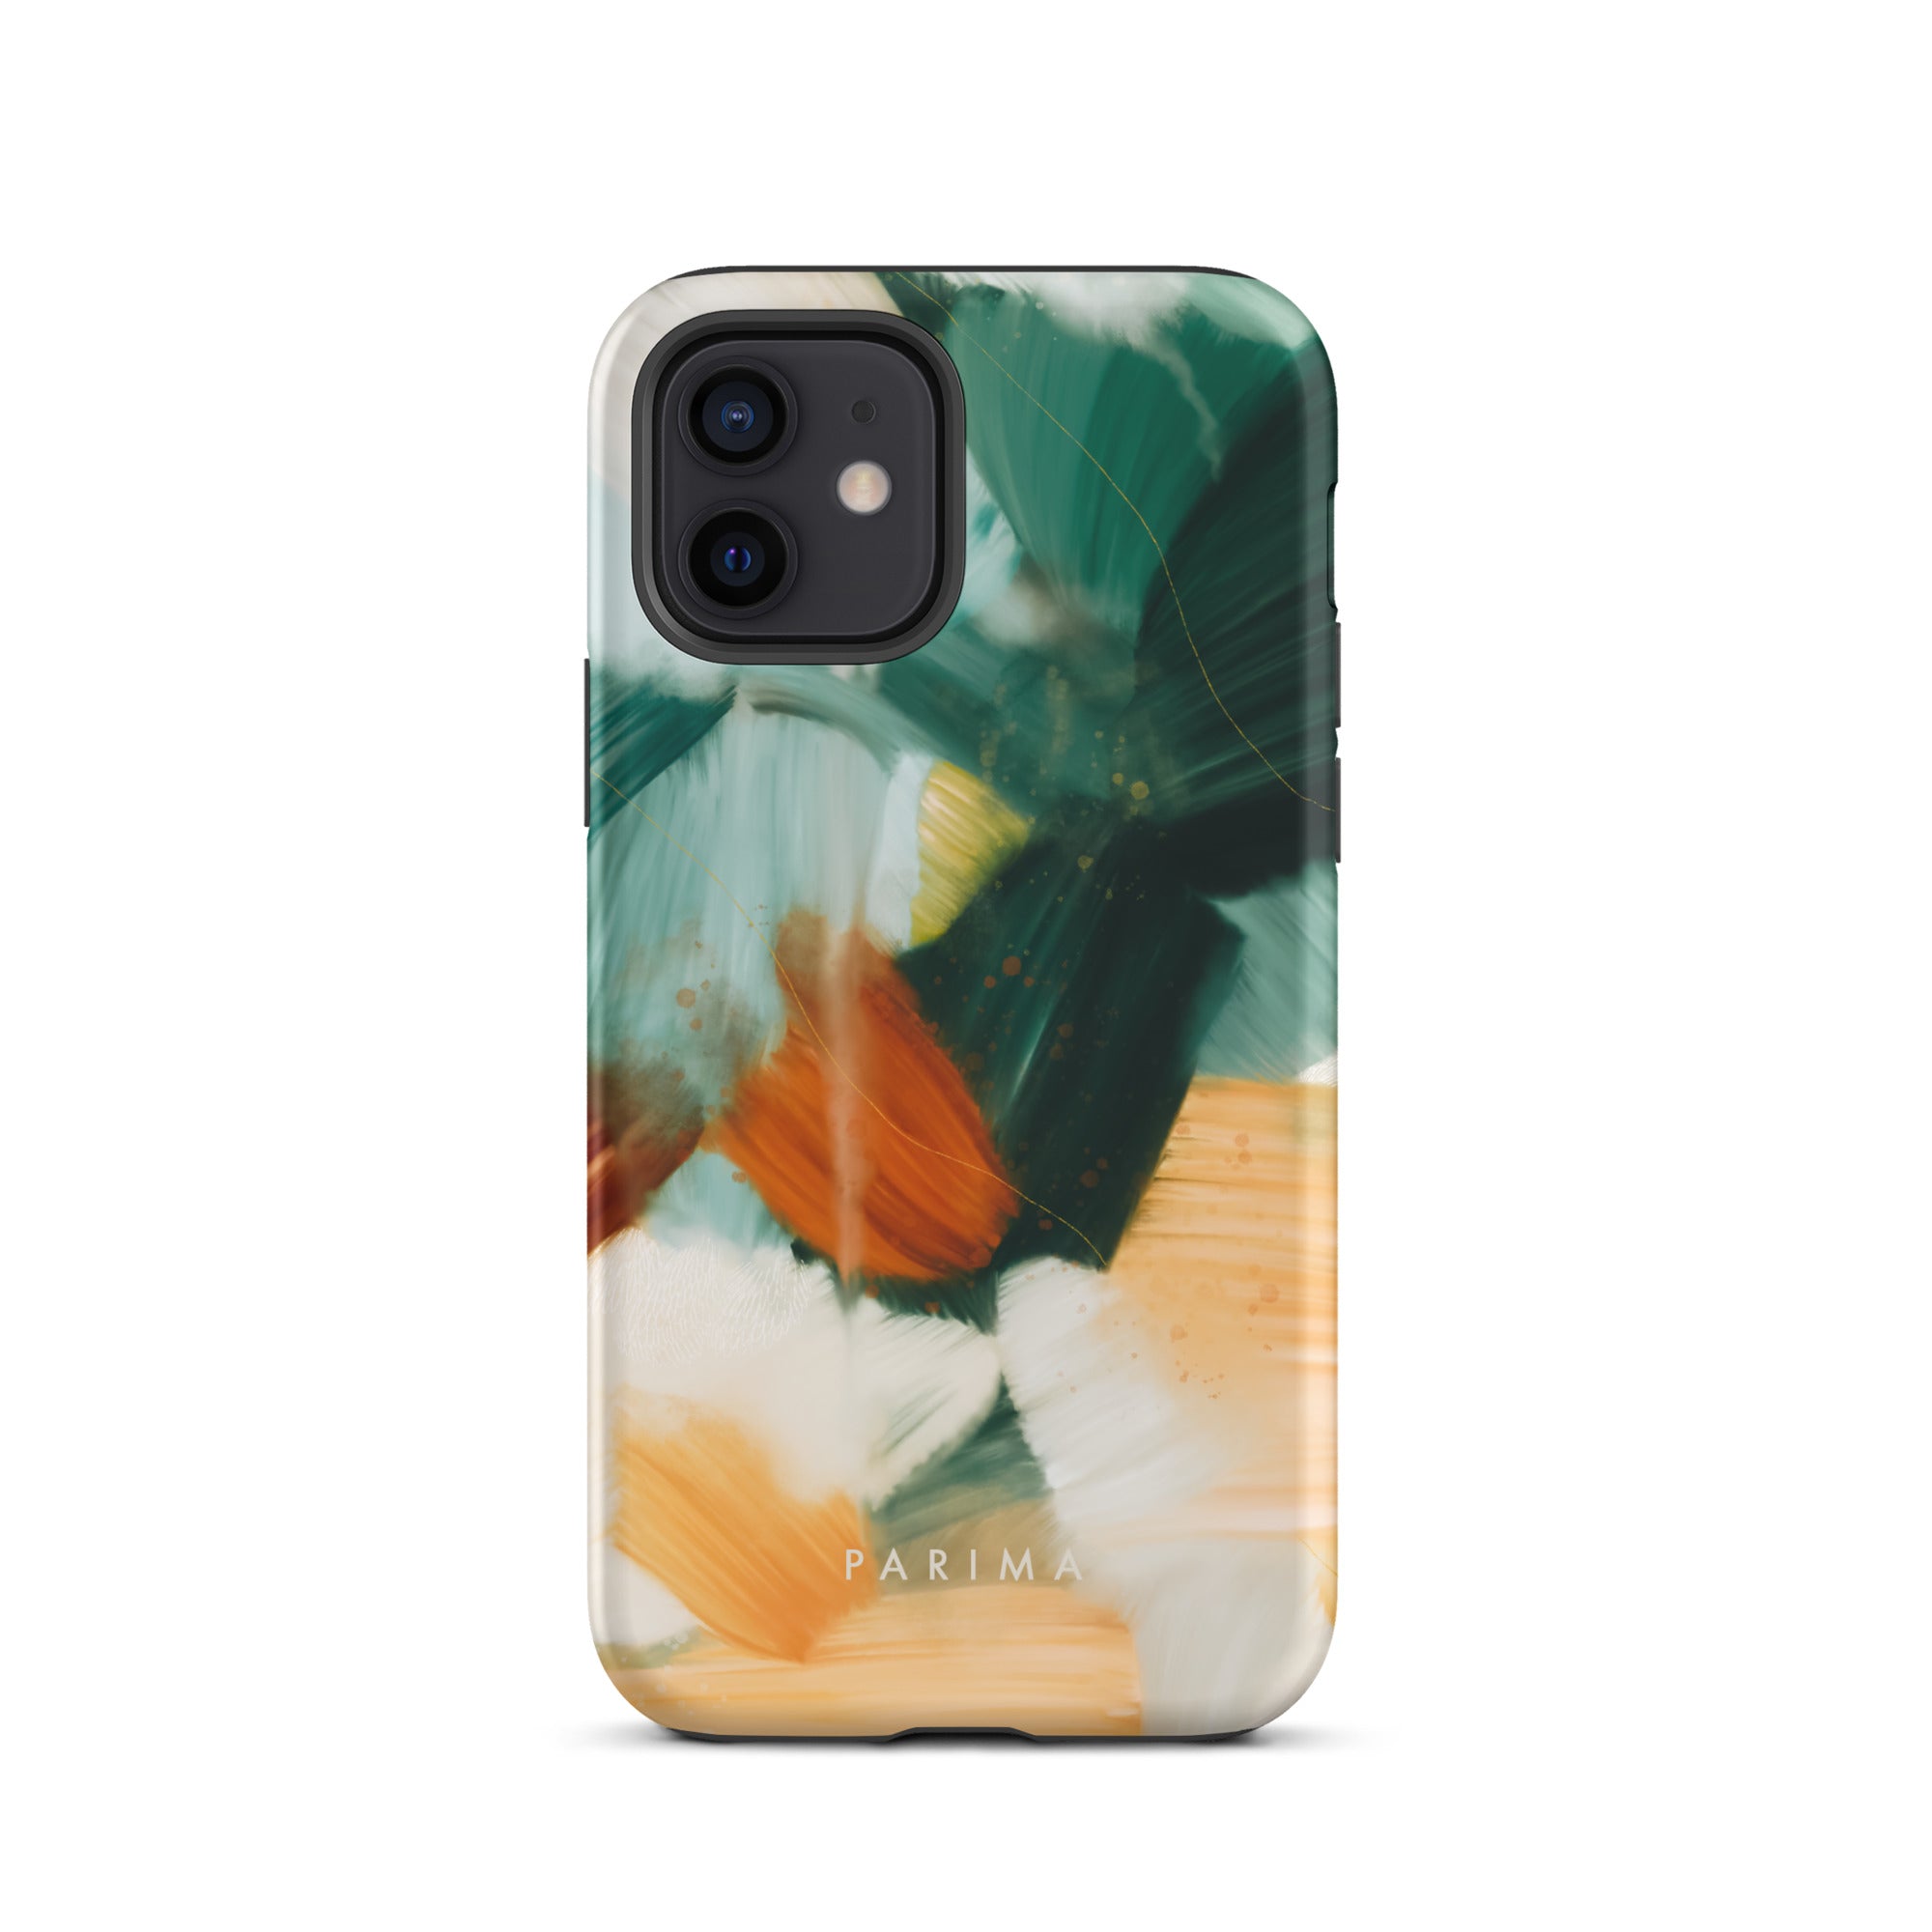 Meridian, green and orange abstract art on iPhone 12 tough case by Parima Studio